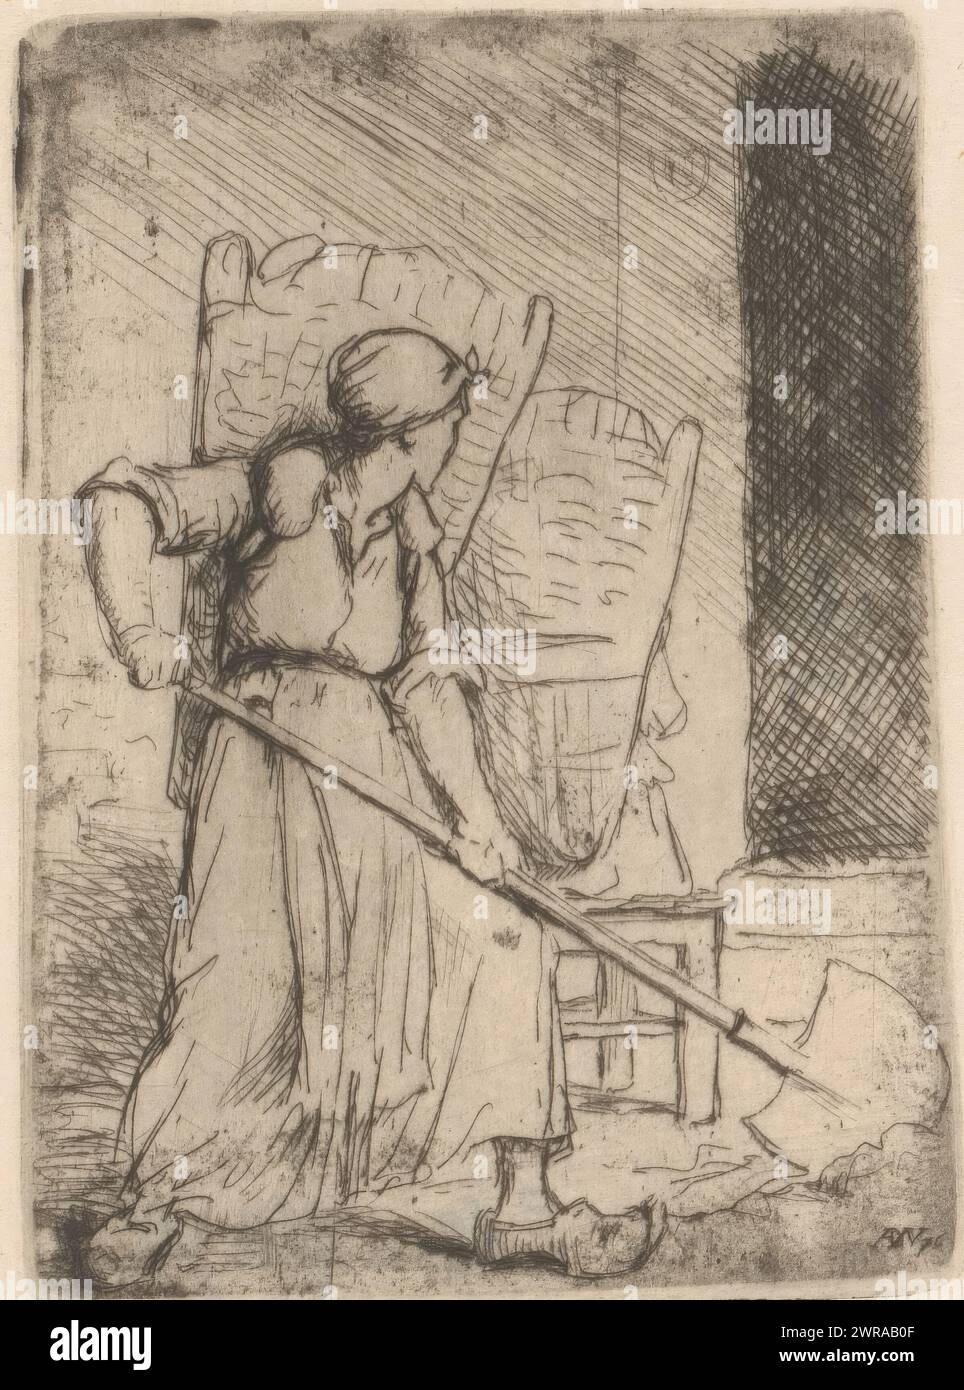 Woman in clogs with shovel and a basket on her back, print maker: Adrien De Witte, 1876, paper, etching, retroussage, height 100 mm × width 74 mm, print Stock Photo